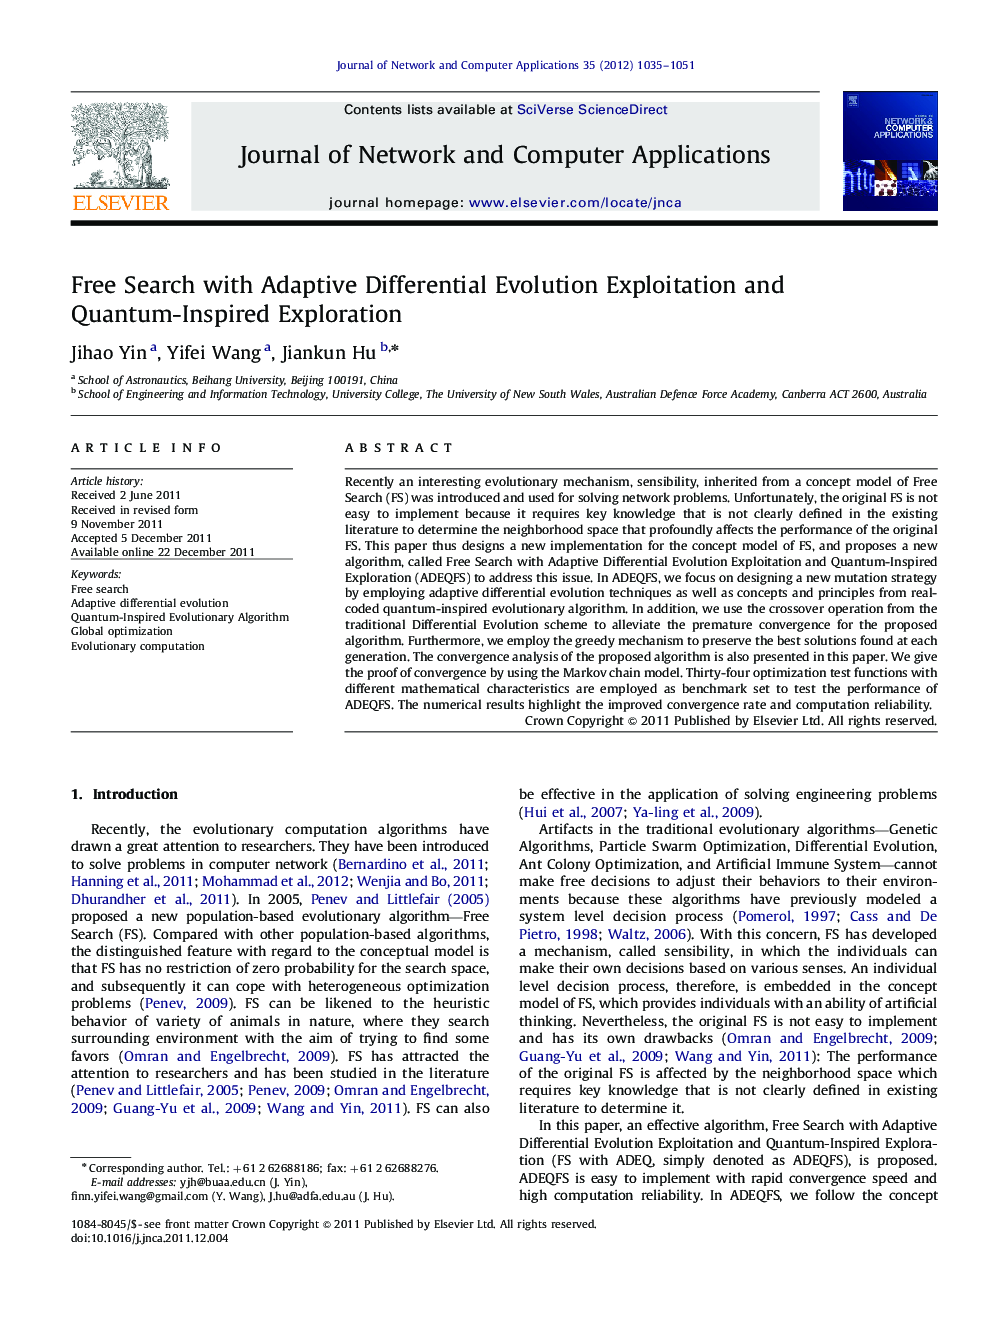 Free Search with Adaptive Differential Evolution Exploitation and Quantum-Inspired Exploration